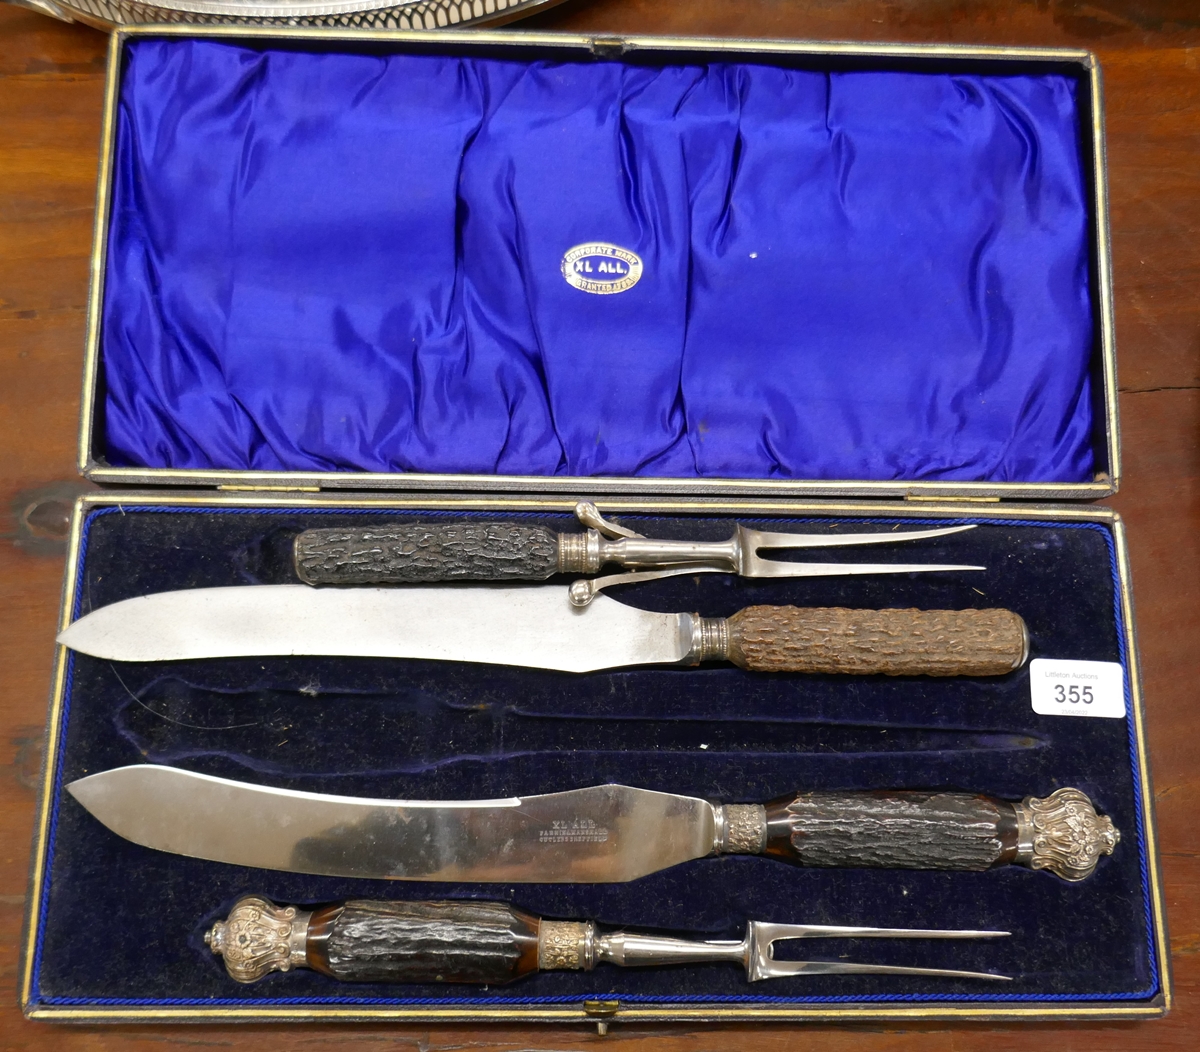 2 vintage antler carving sets 1 Parkin and Marshall and the other John Derby & Sons